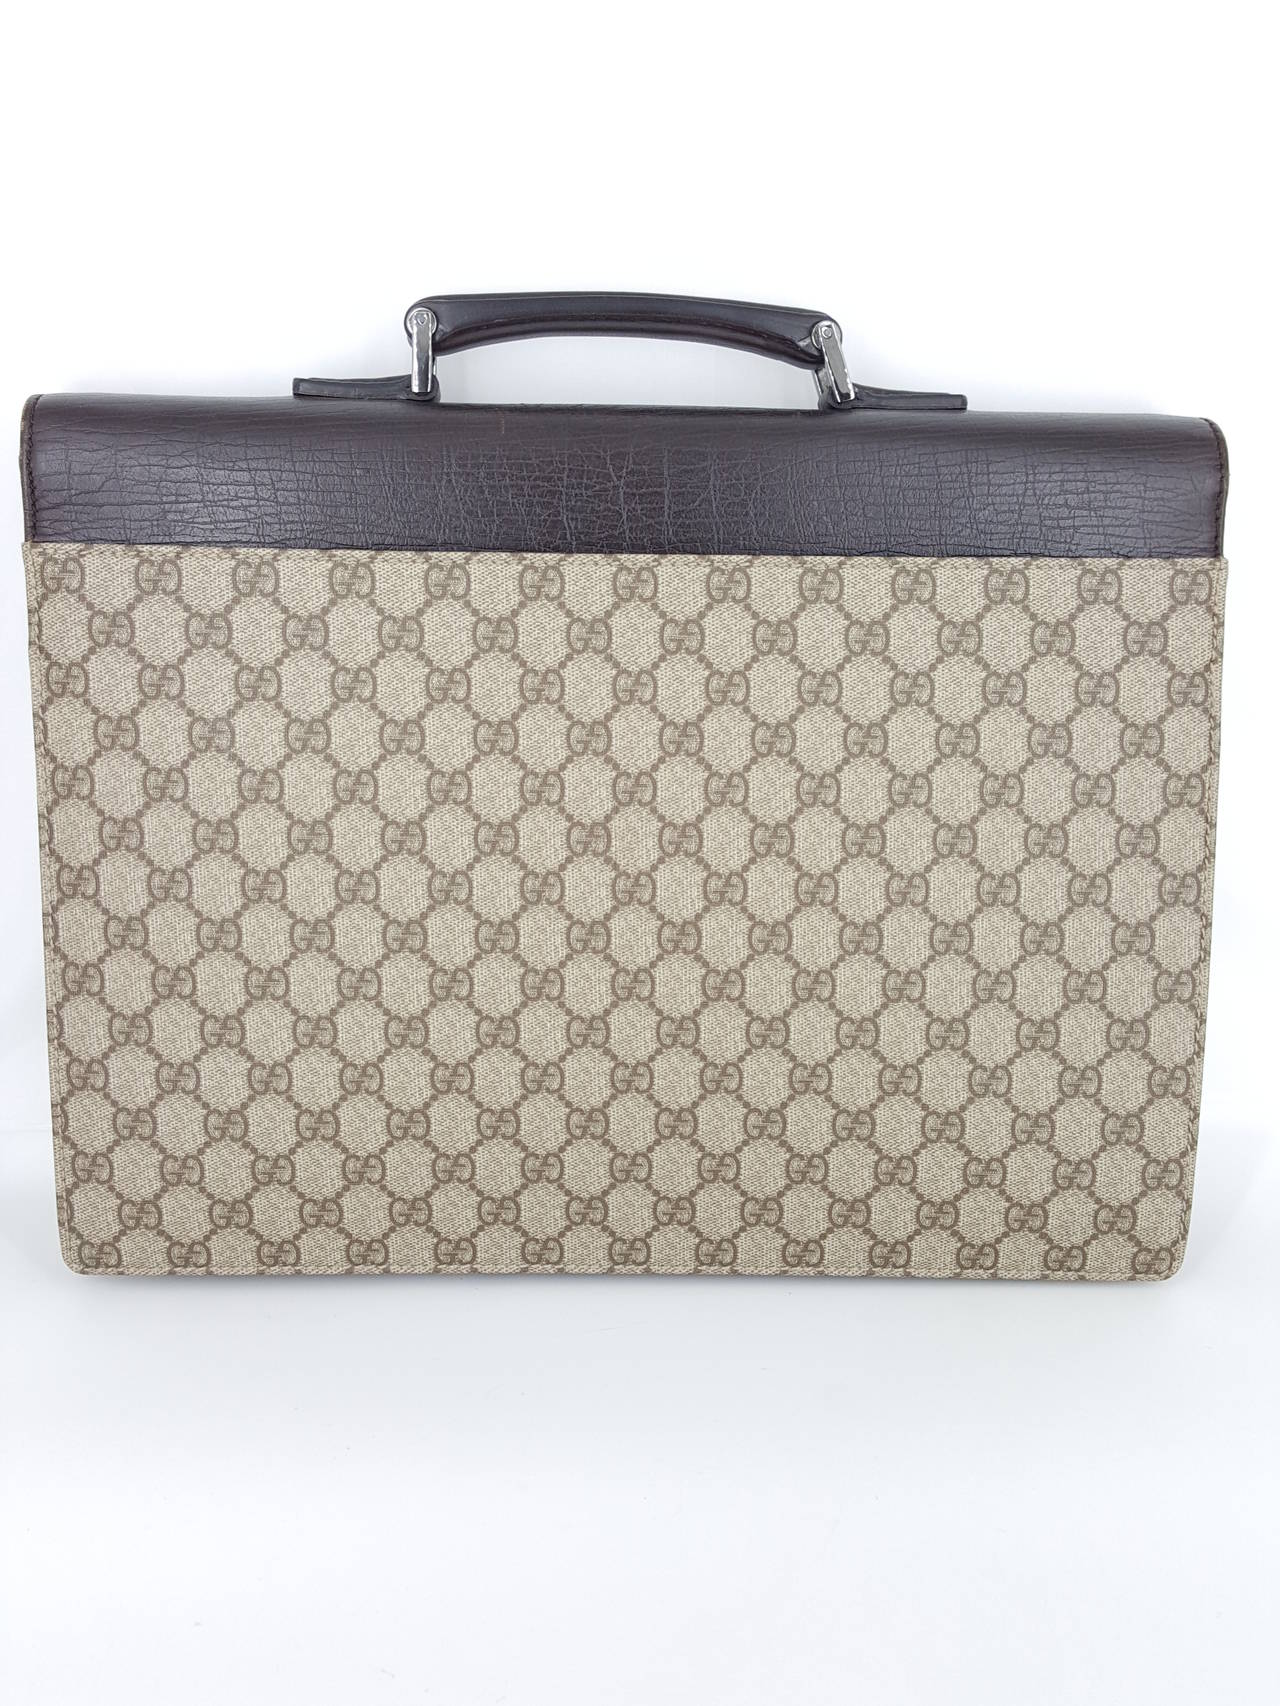 Offered for sale is a Smart GUCCI Briefcase in the brown 